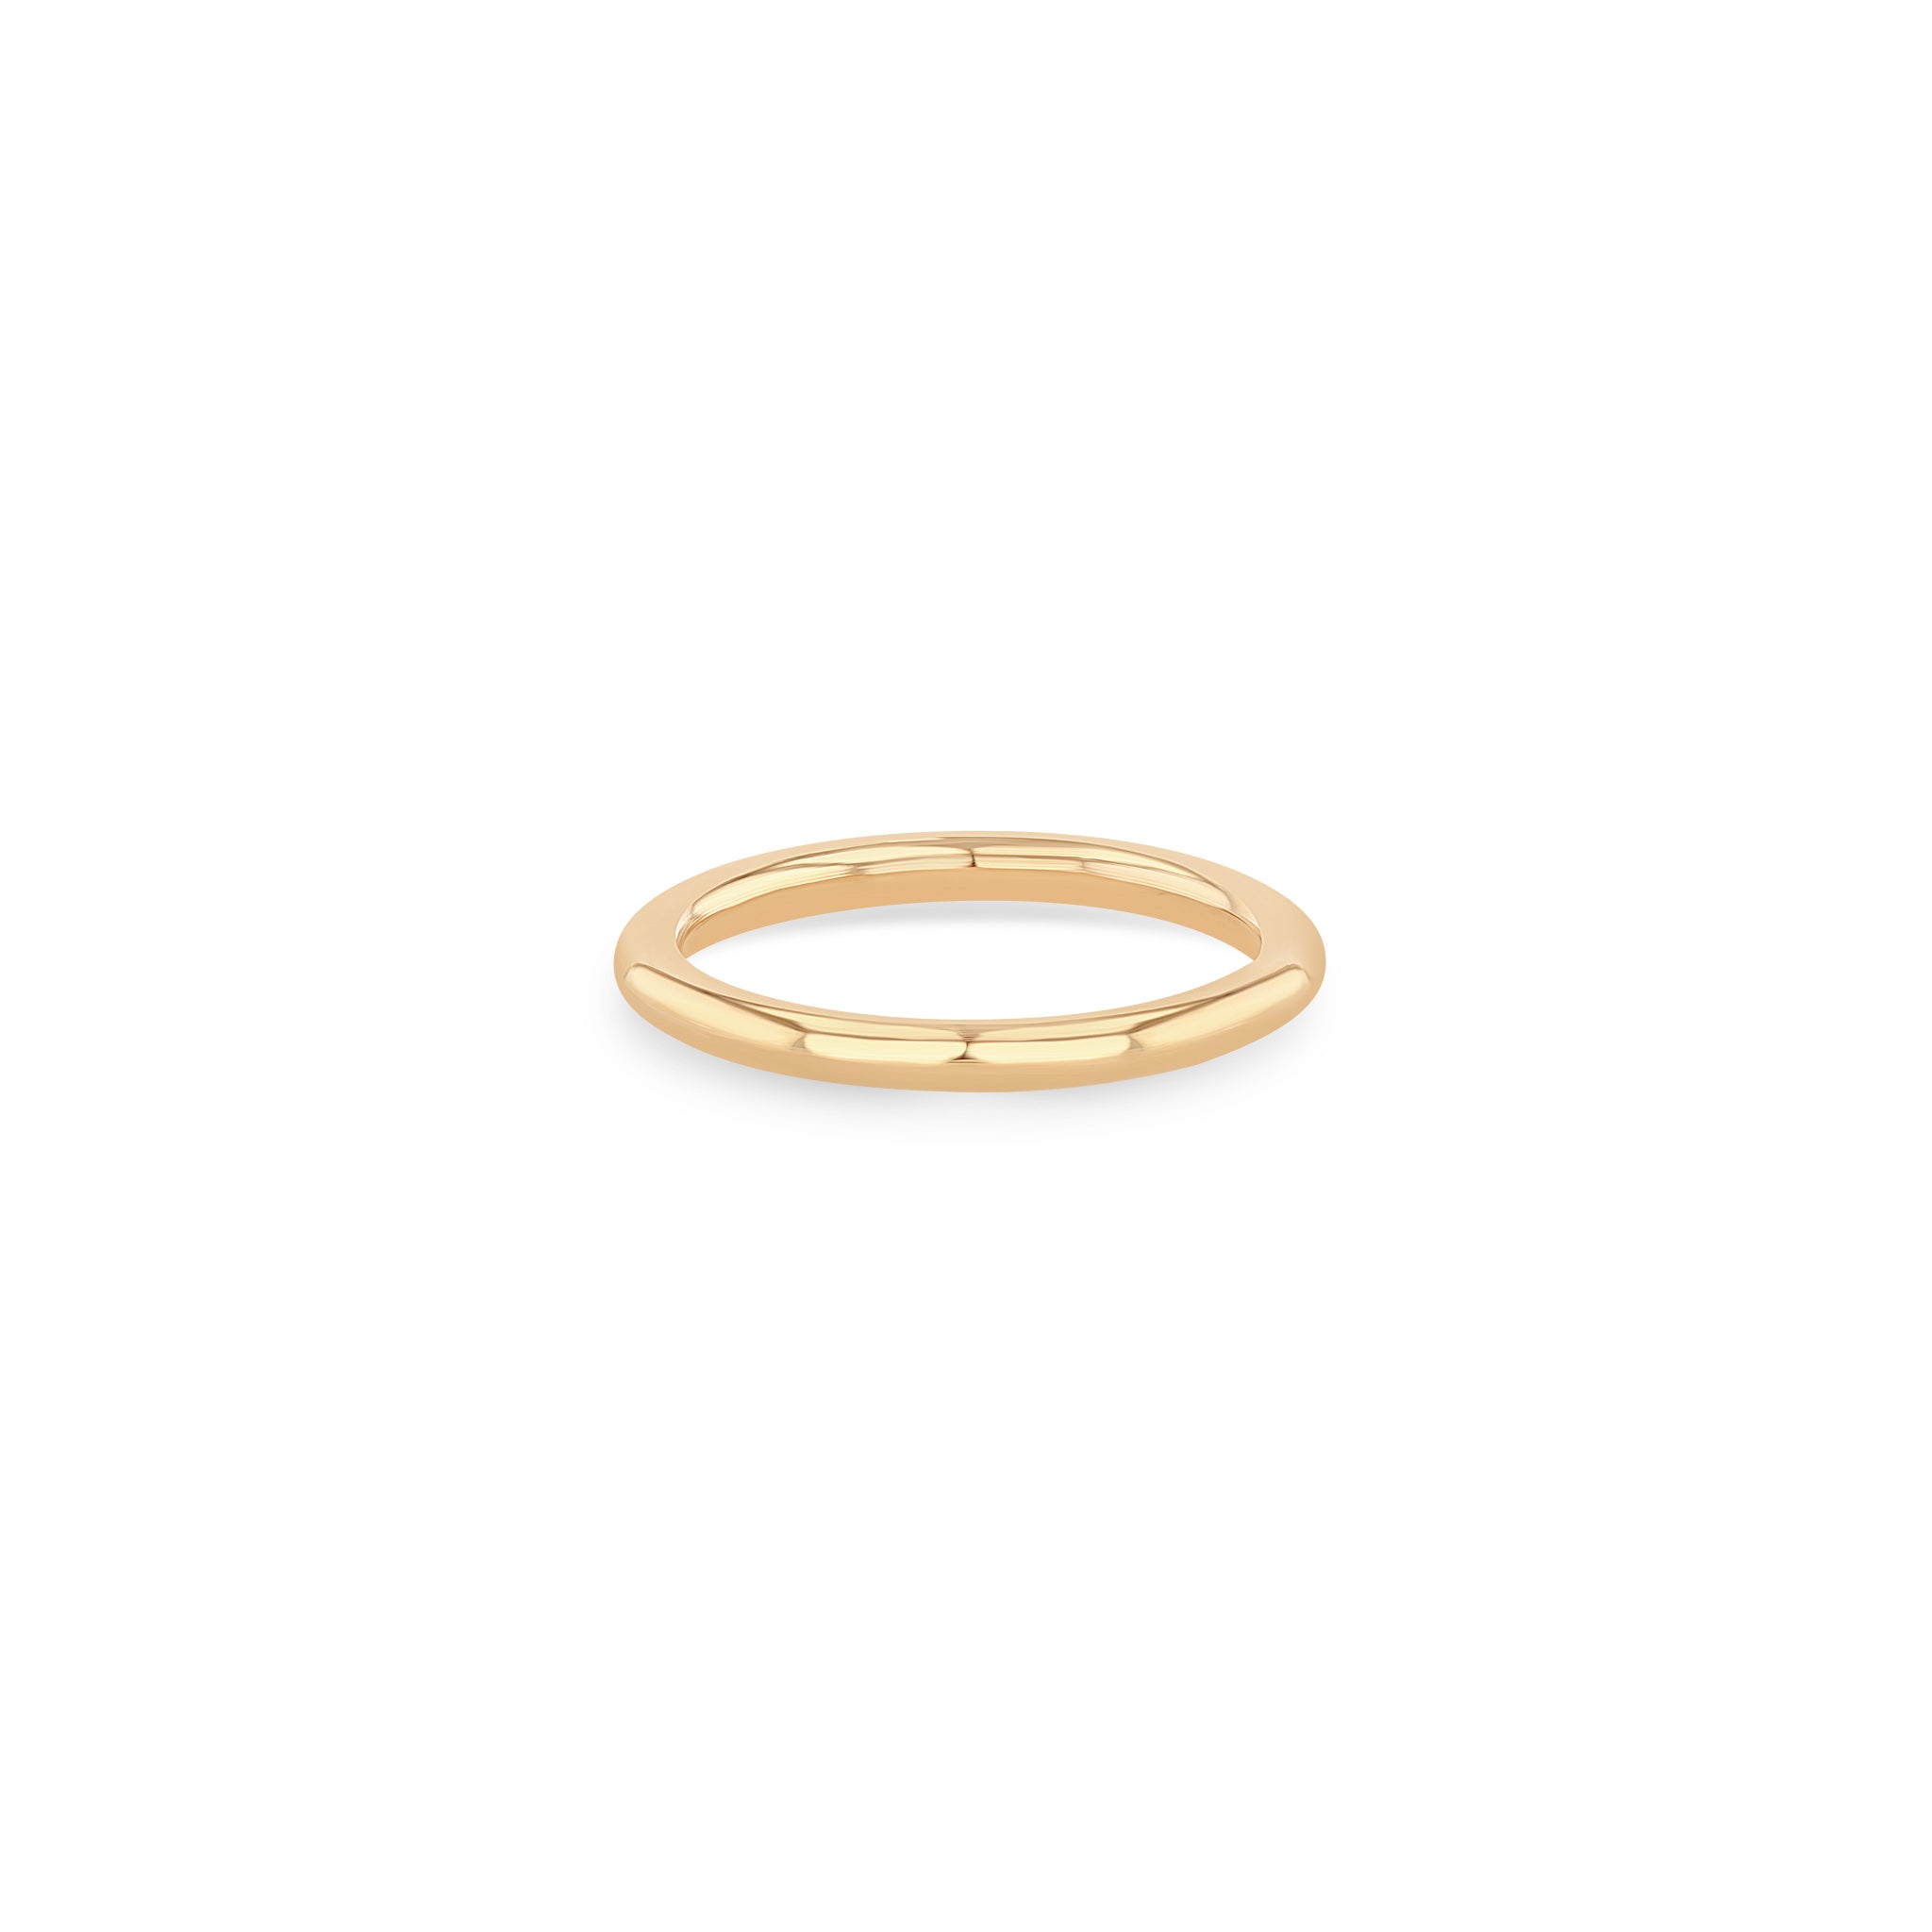 Buy Gold Rings for Men by Yellow Chimes Online | Ajio.com